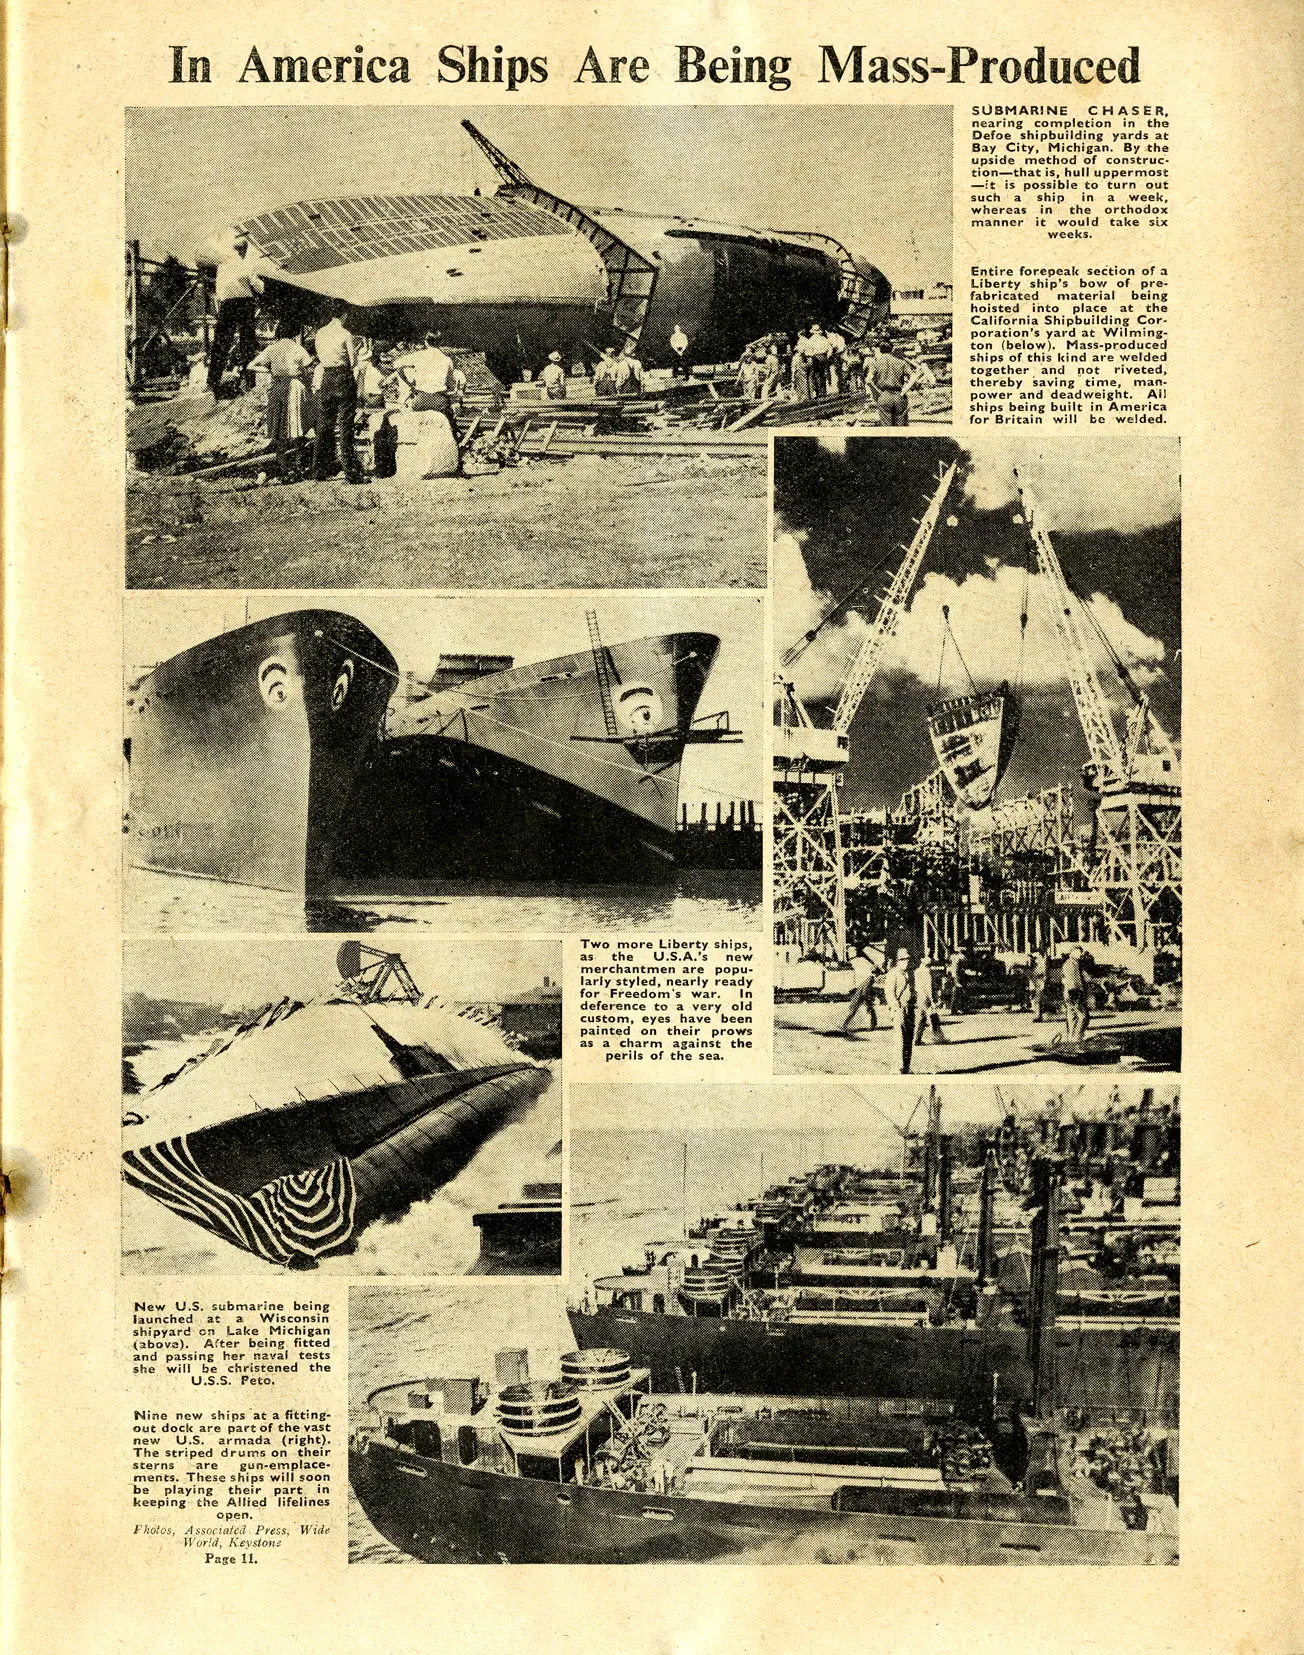 A page of The War Illustrated showing several photos of American ships under construction and nearing completion.